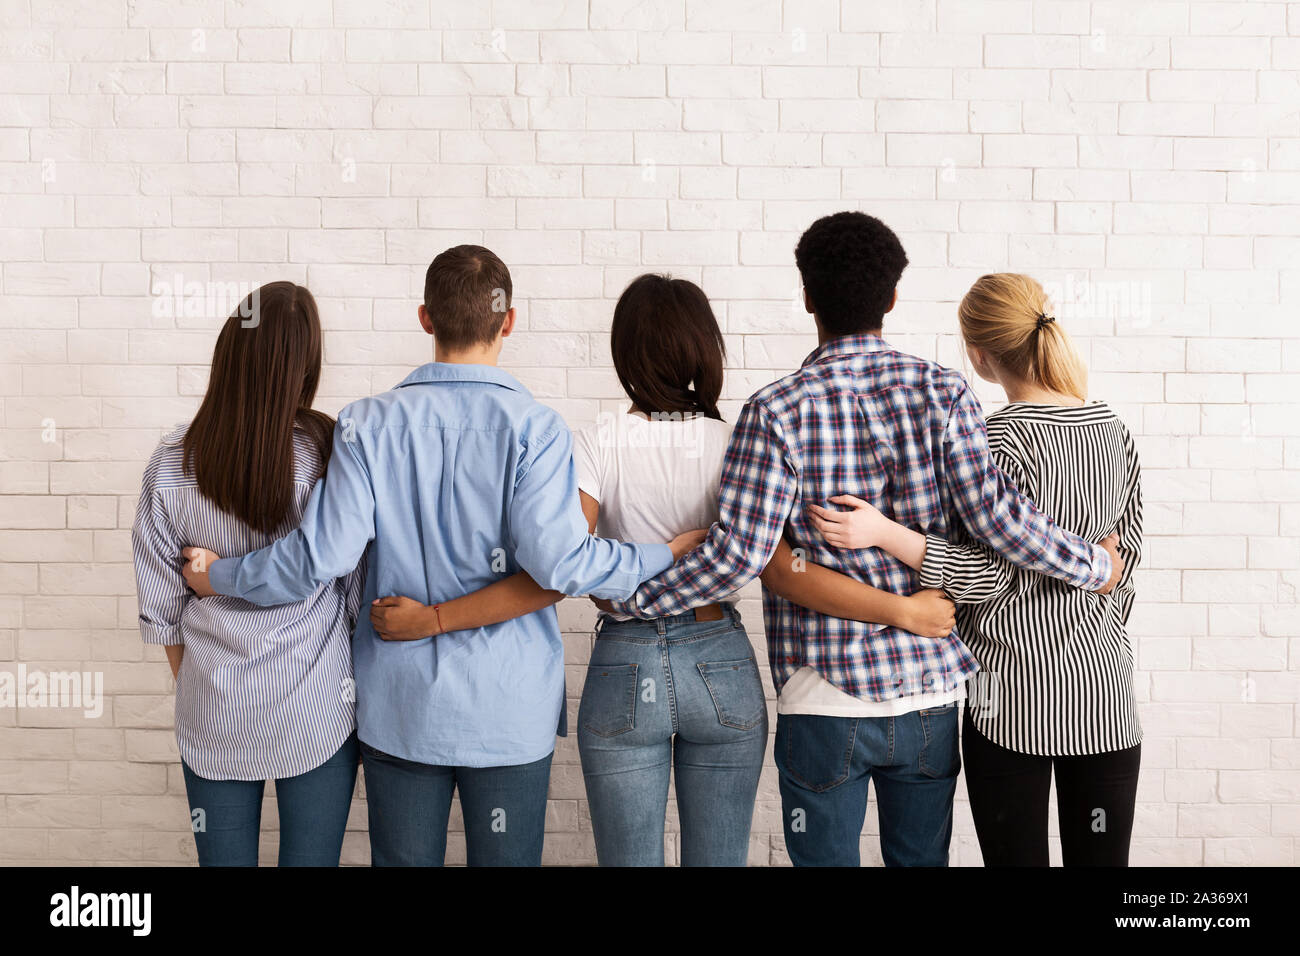 Teen friends embracing and looking at white brick wall Stock Photo